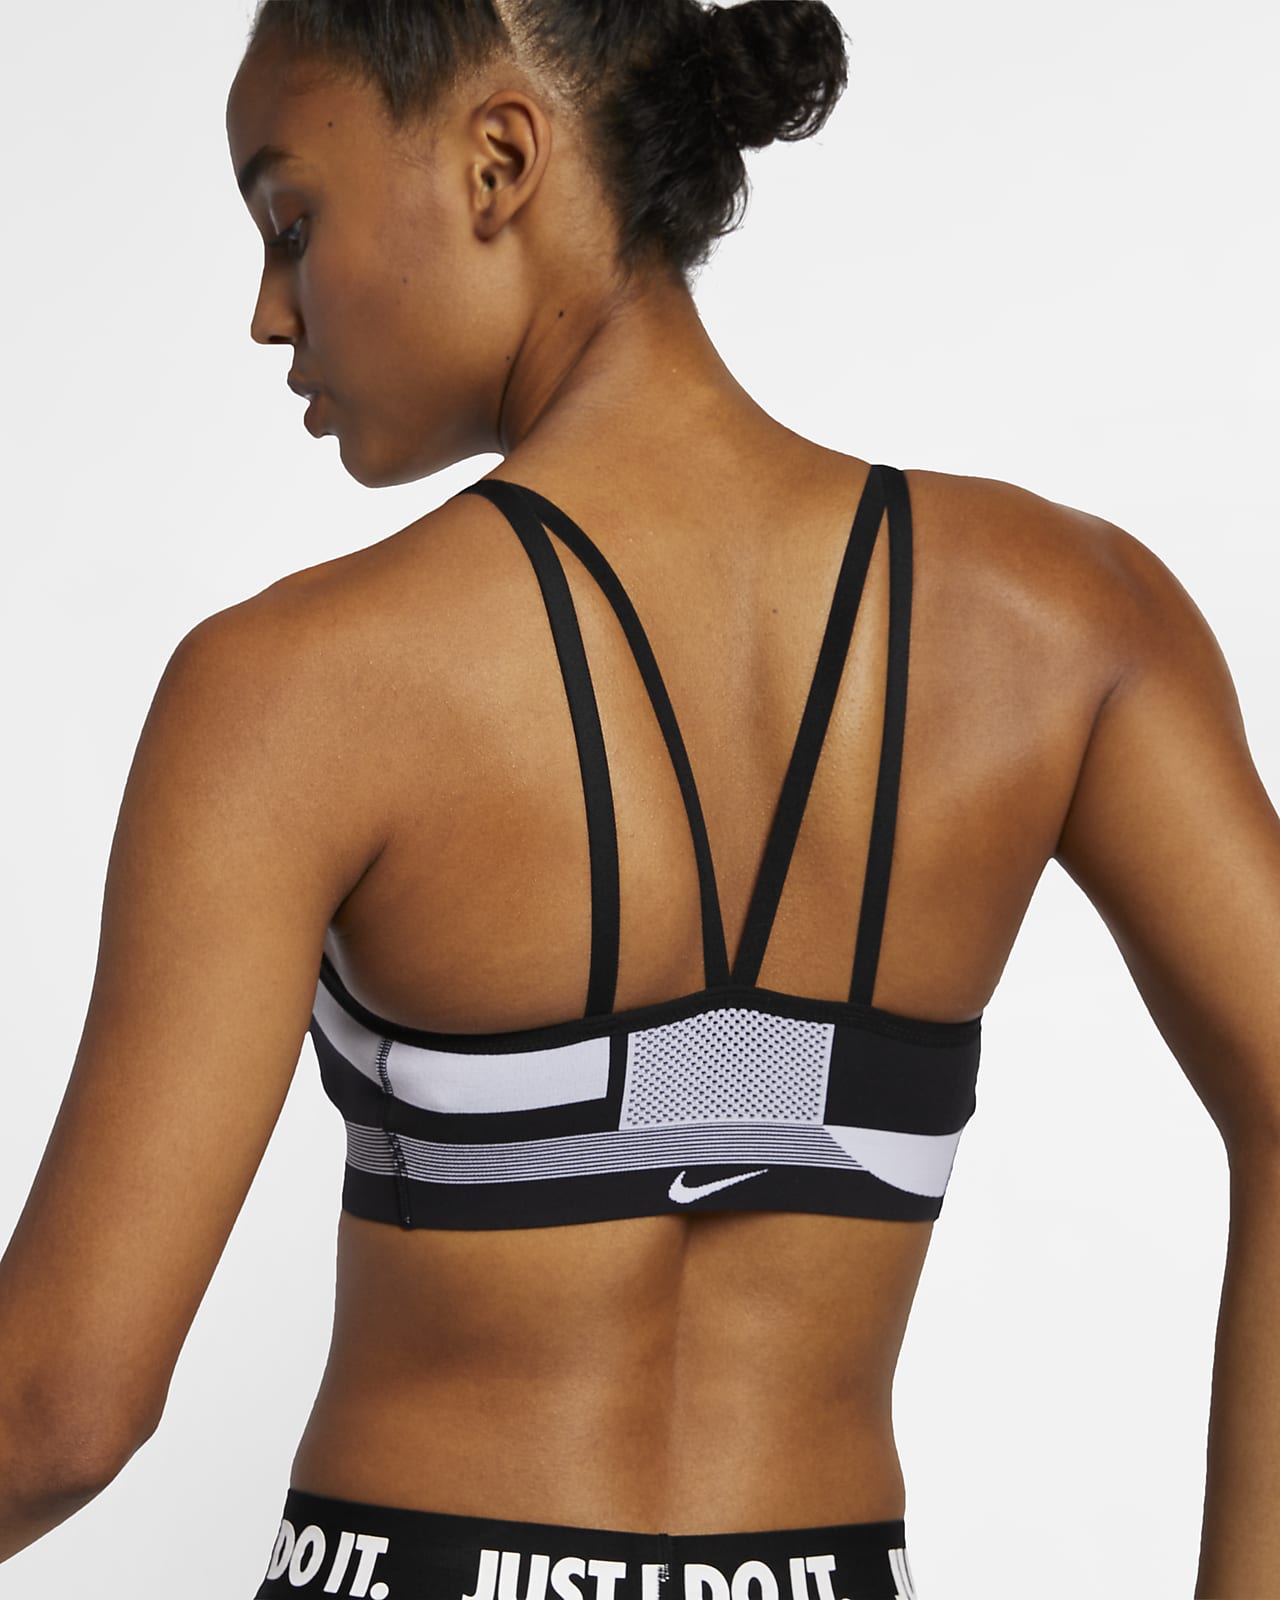 pack of nike sports bras